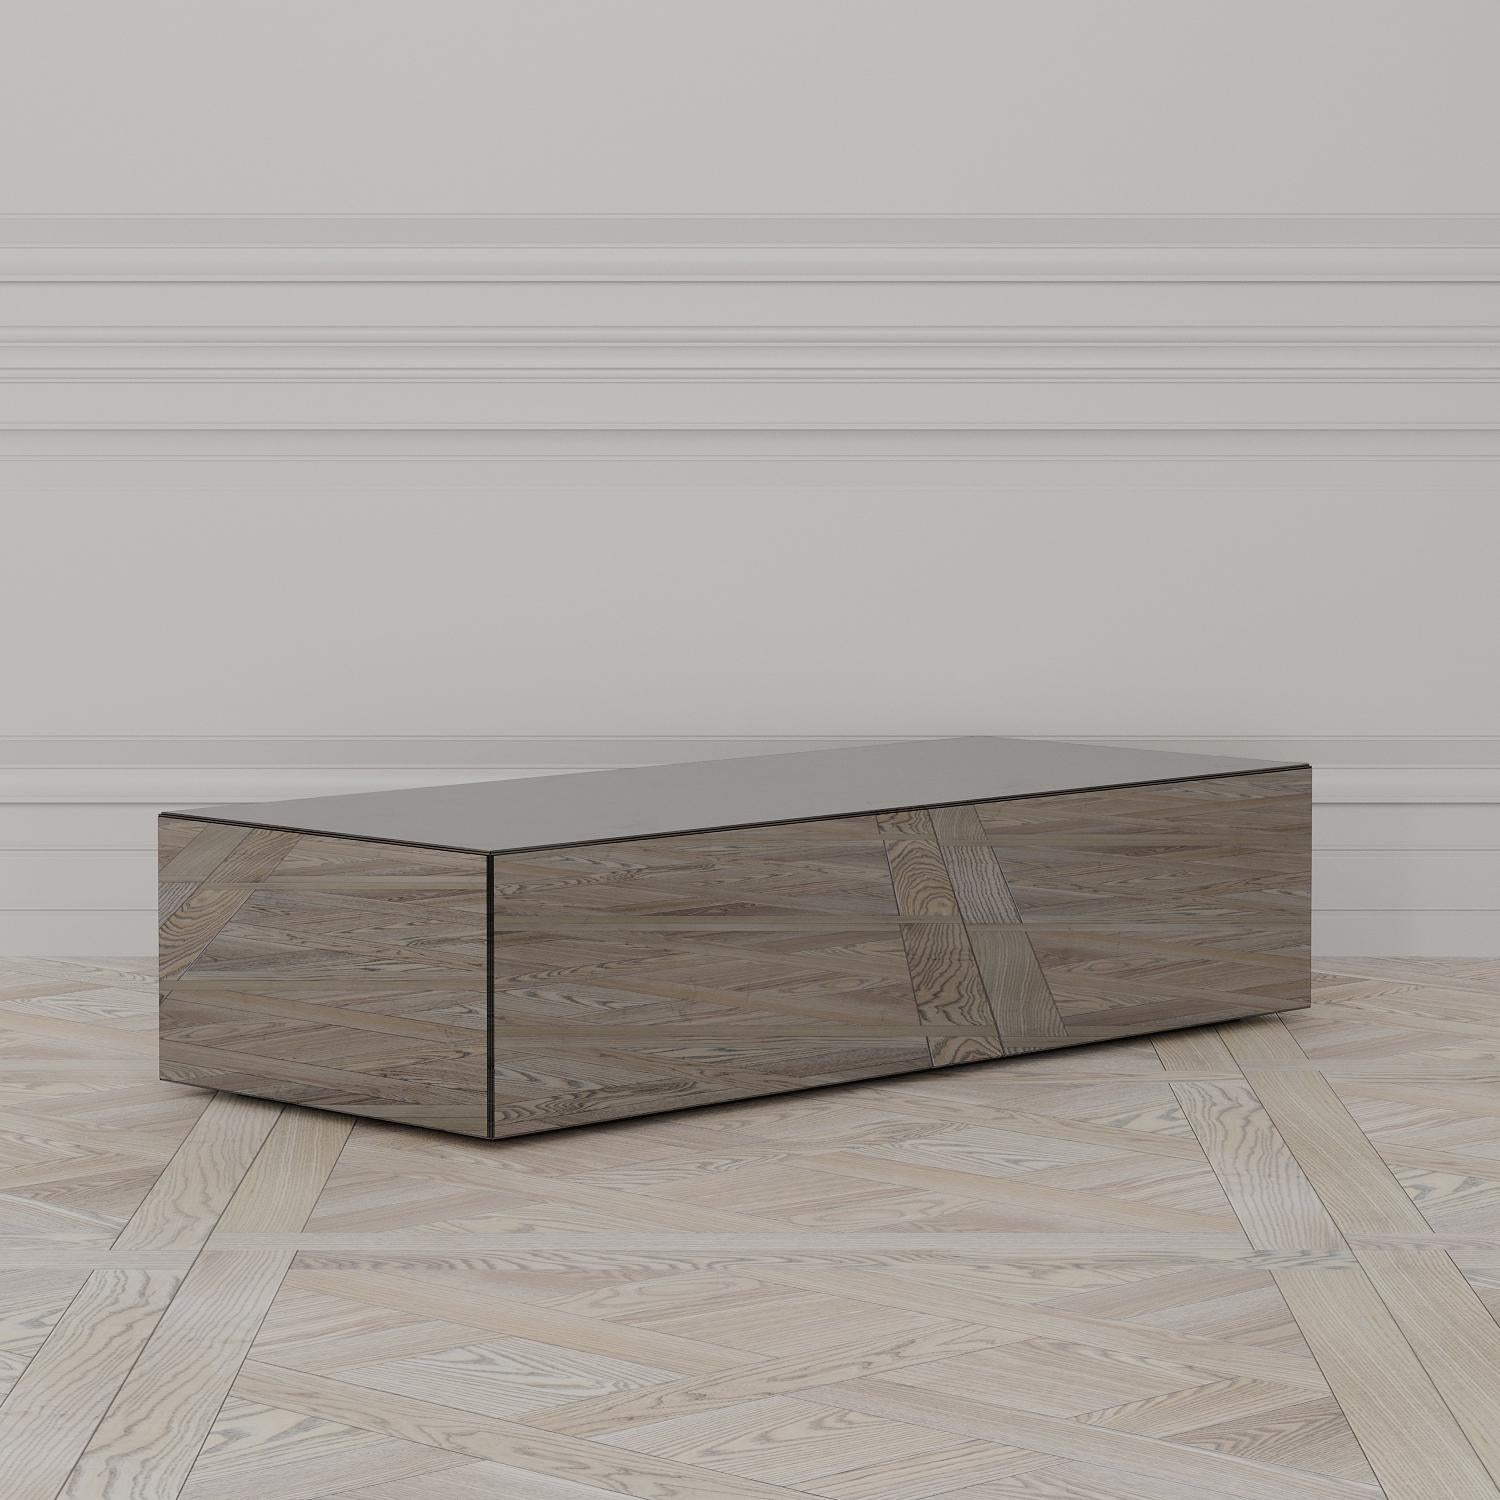 The Lasthour coffee table is designed by Emél & Browne in the Minimalist and contemporary style and custom made in Italy by skilled artisans.

Designed by Emél & Browne in Notting Hill London, the Lasthour coffee table embodies the essence of